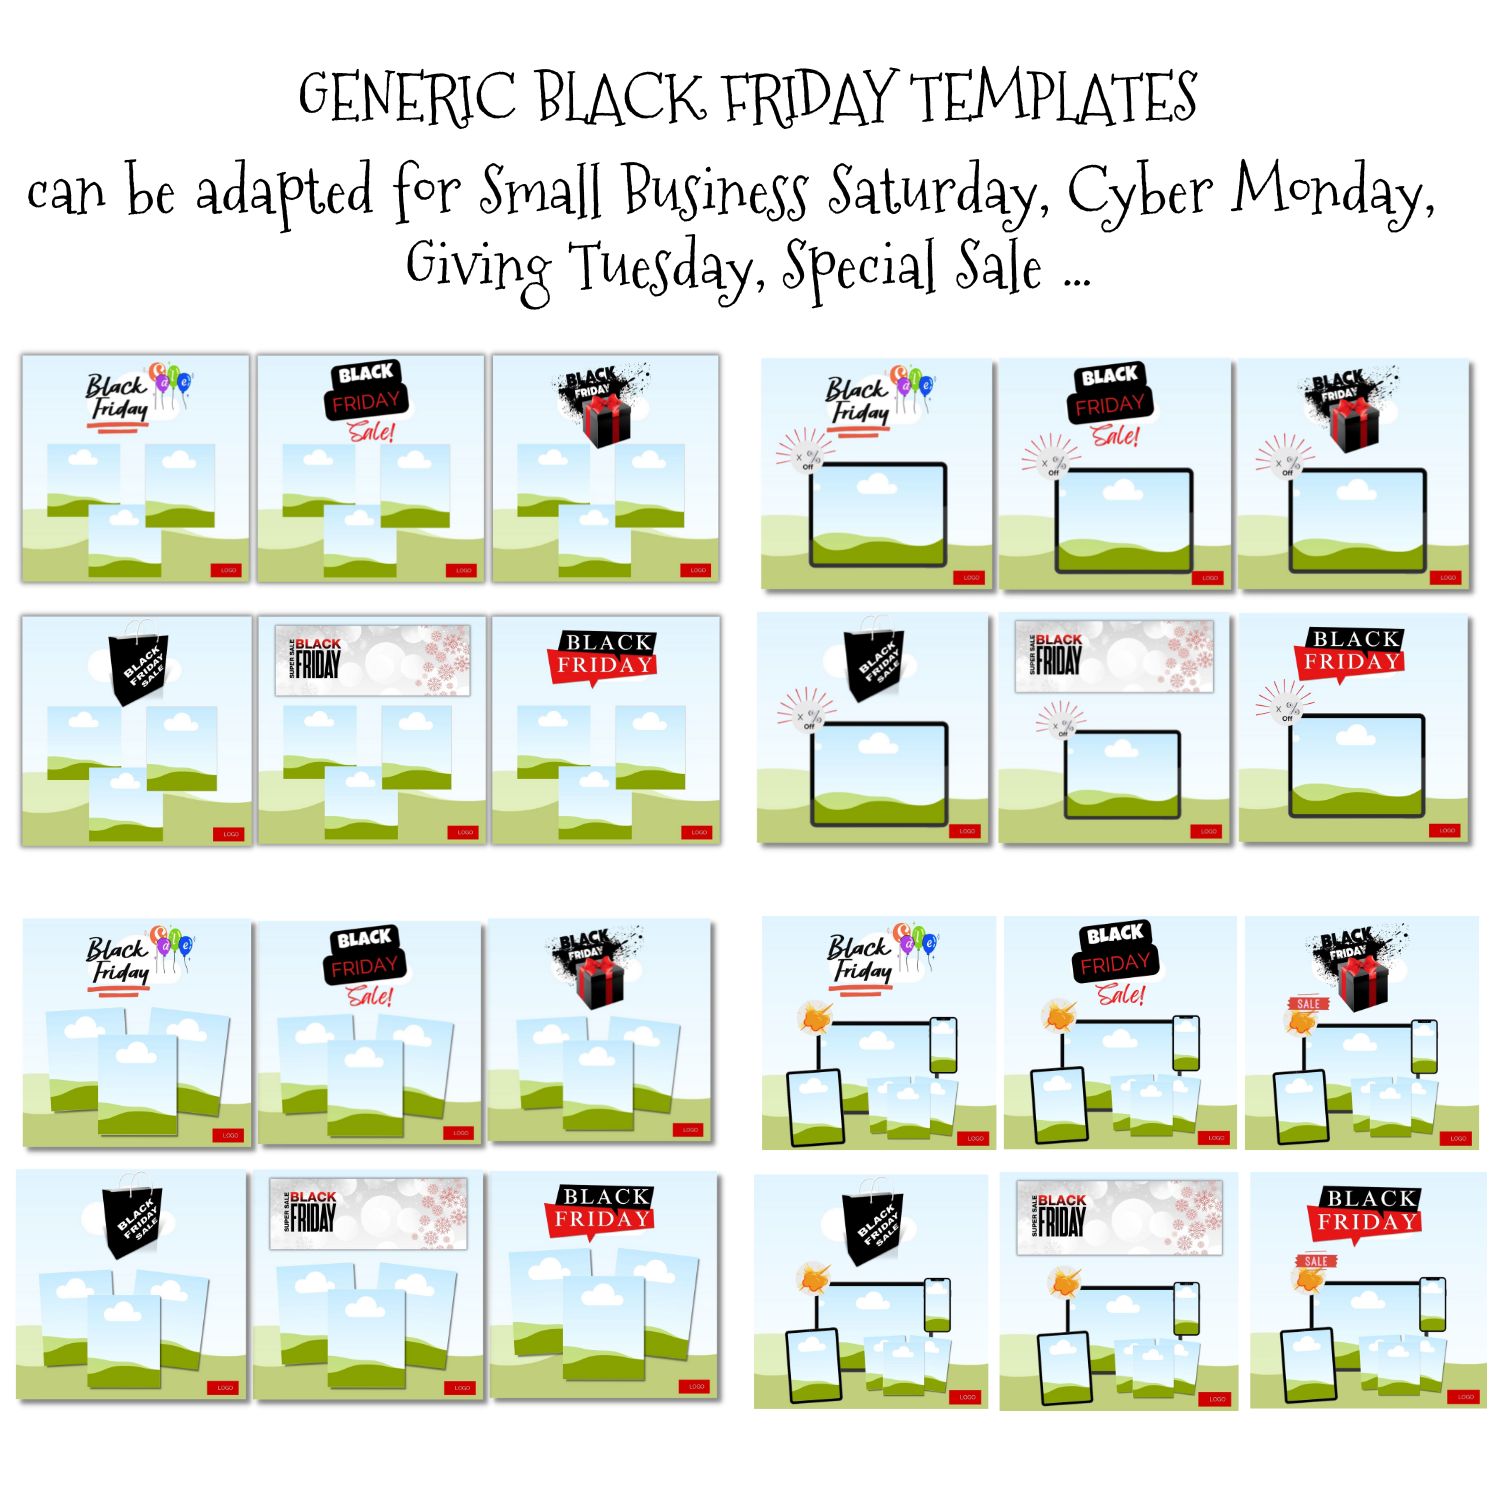 Black Friday Generic Templates for Video Shorts